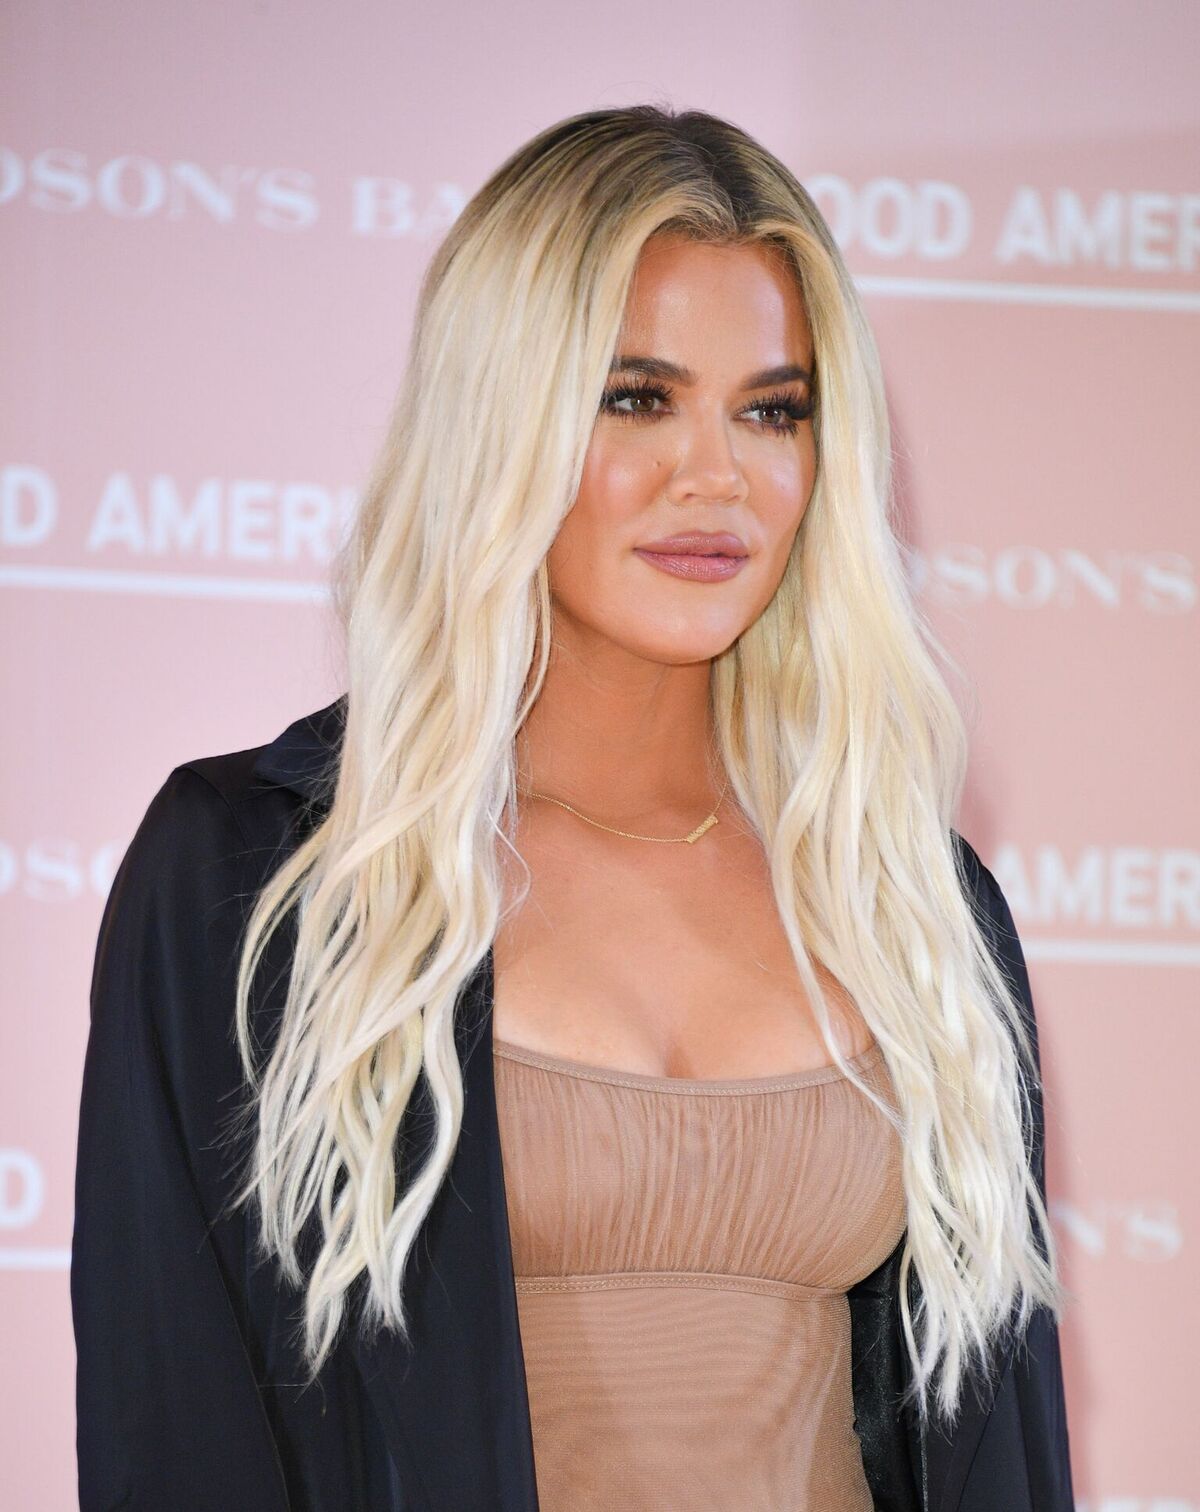 Khloe Kardashian attends Hudson's Bay's launch of Good American in Toronto on September 18, 2019 | Photo: Getty Images